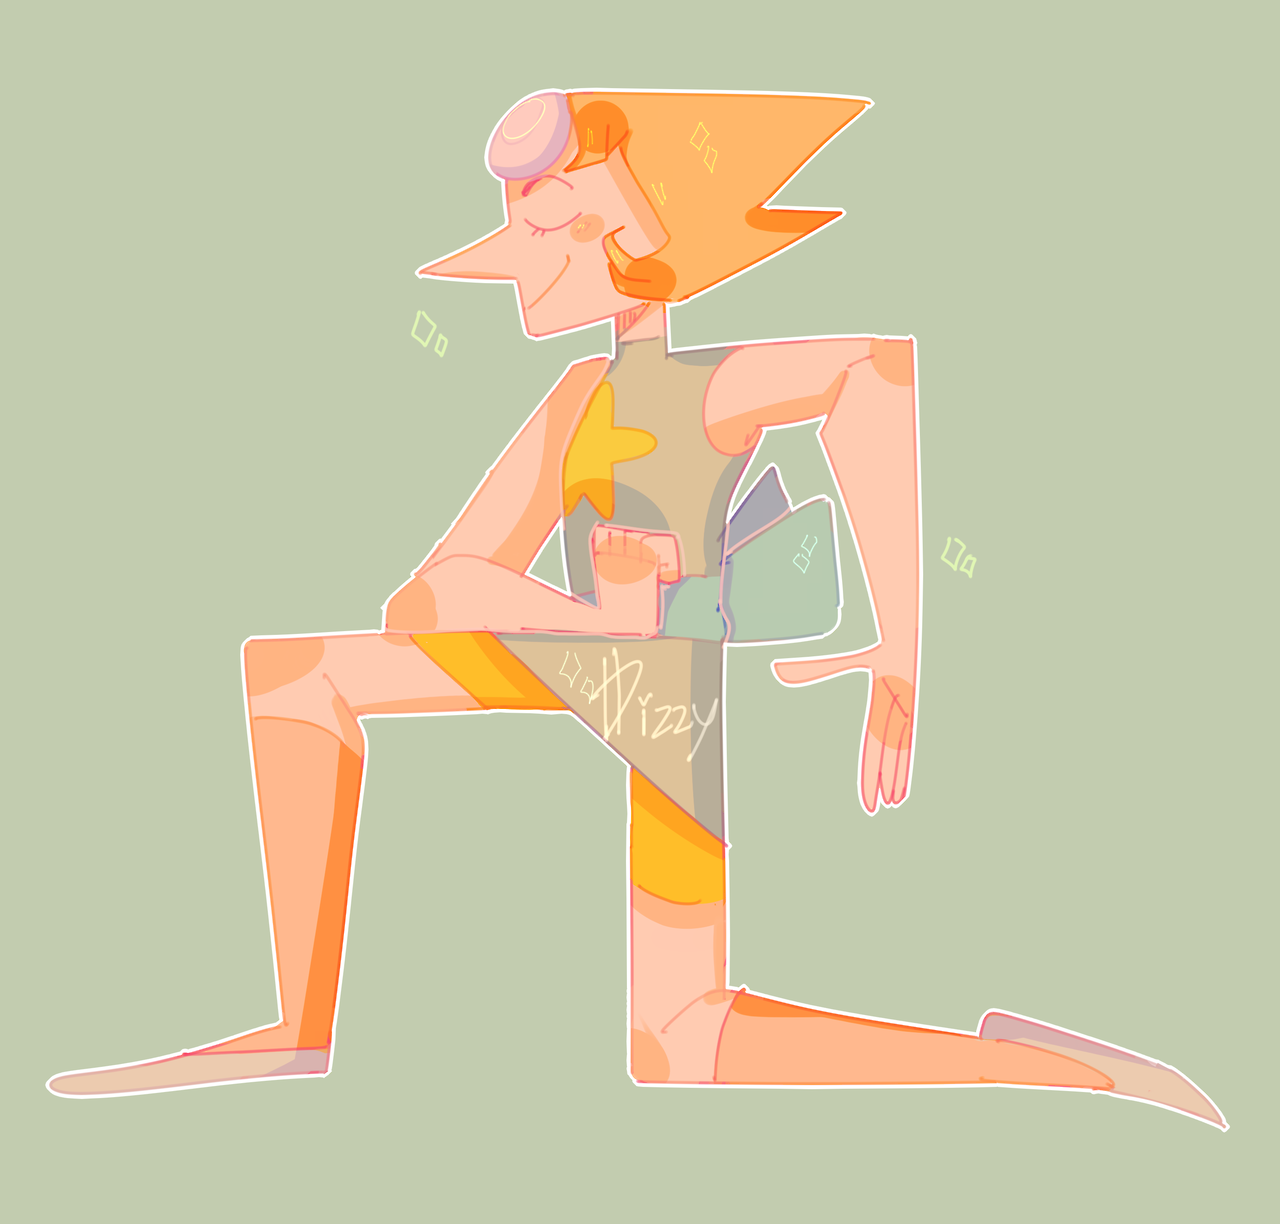 I haven’t drawn pearl in a while